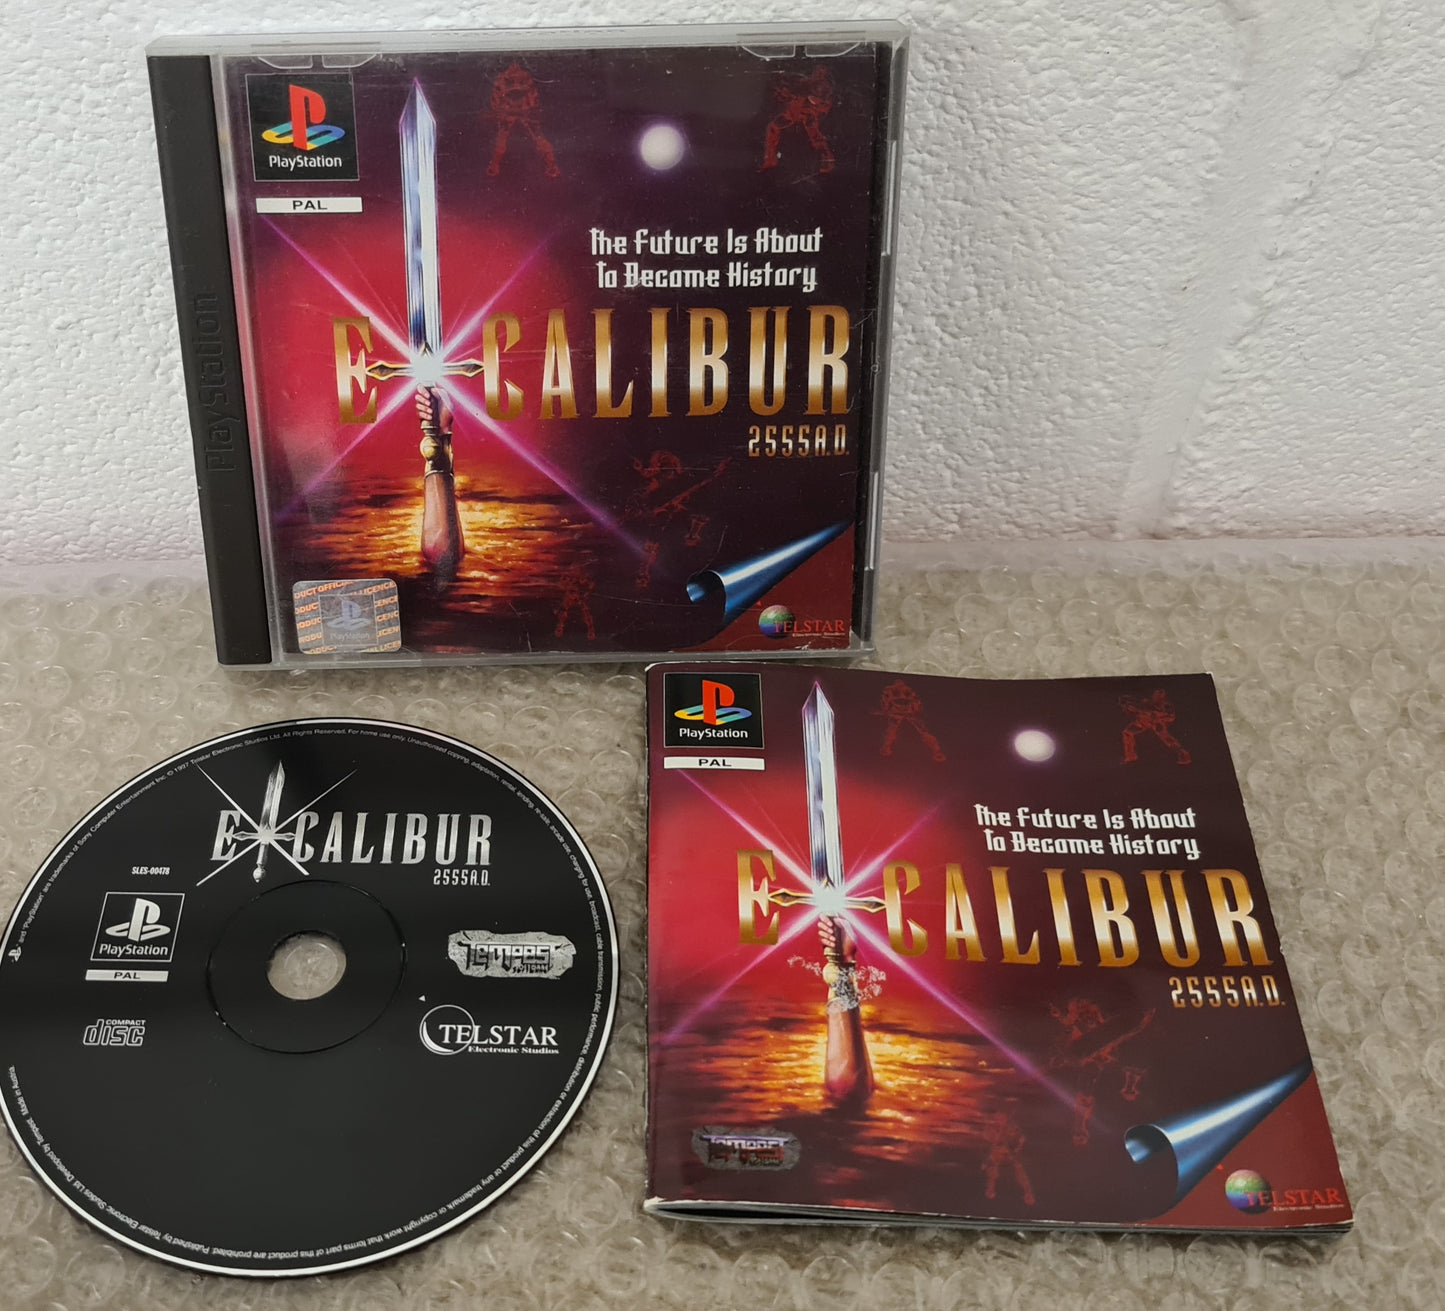 Excalibur 2555 A.D Sony Playstation 1 (PS1) Game